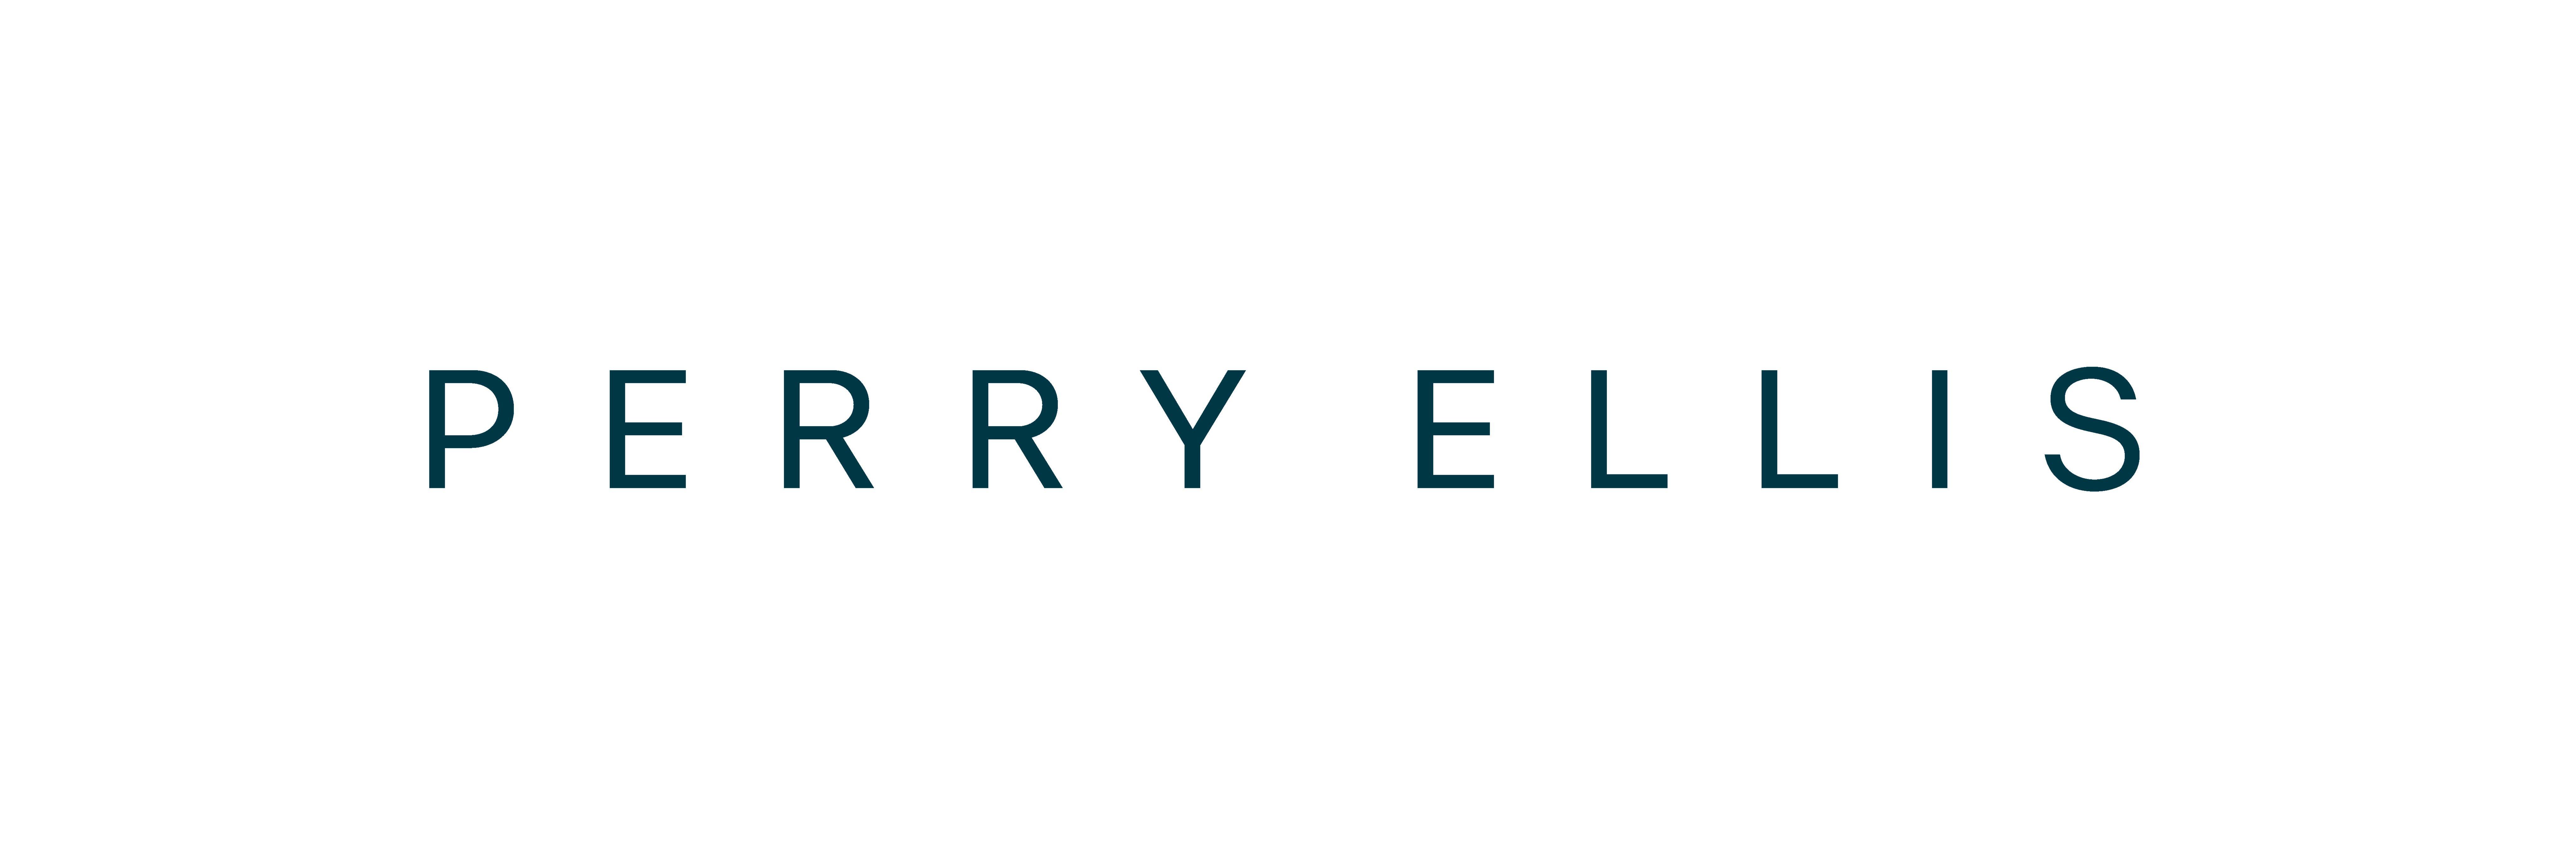 Ellis Logo - What font is used for the Perry Ellis logo? : identifythisfont